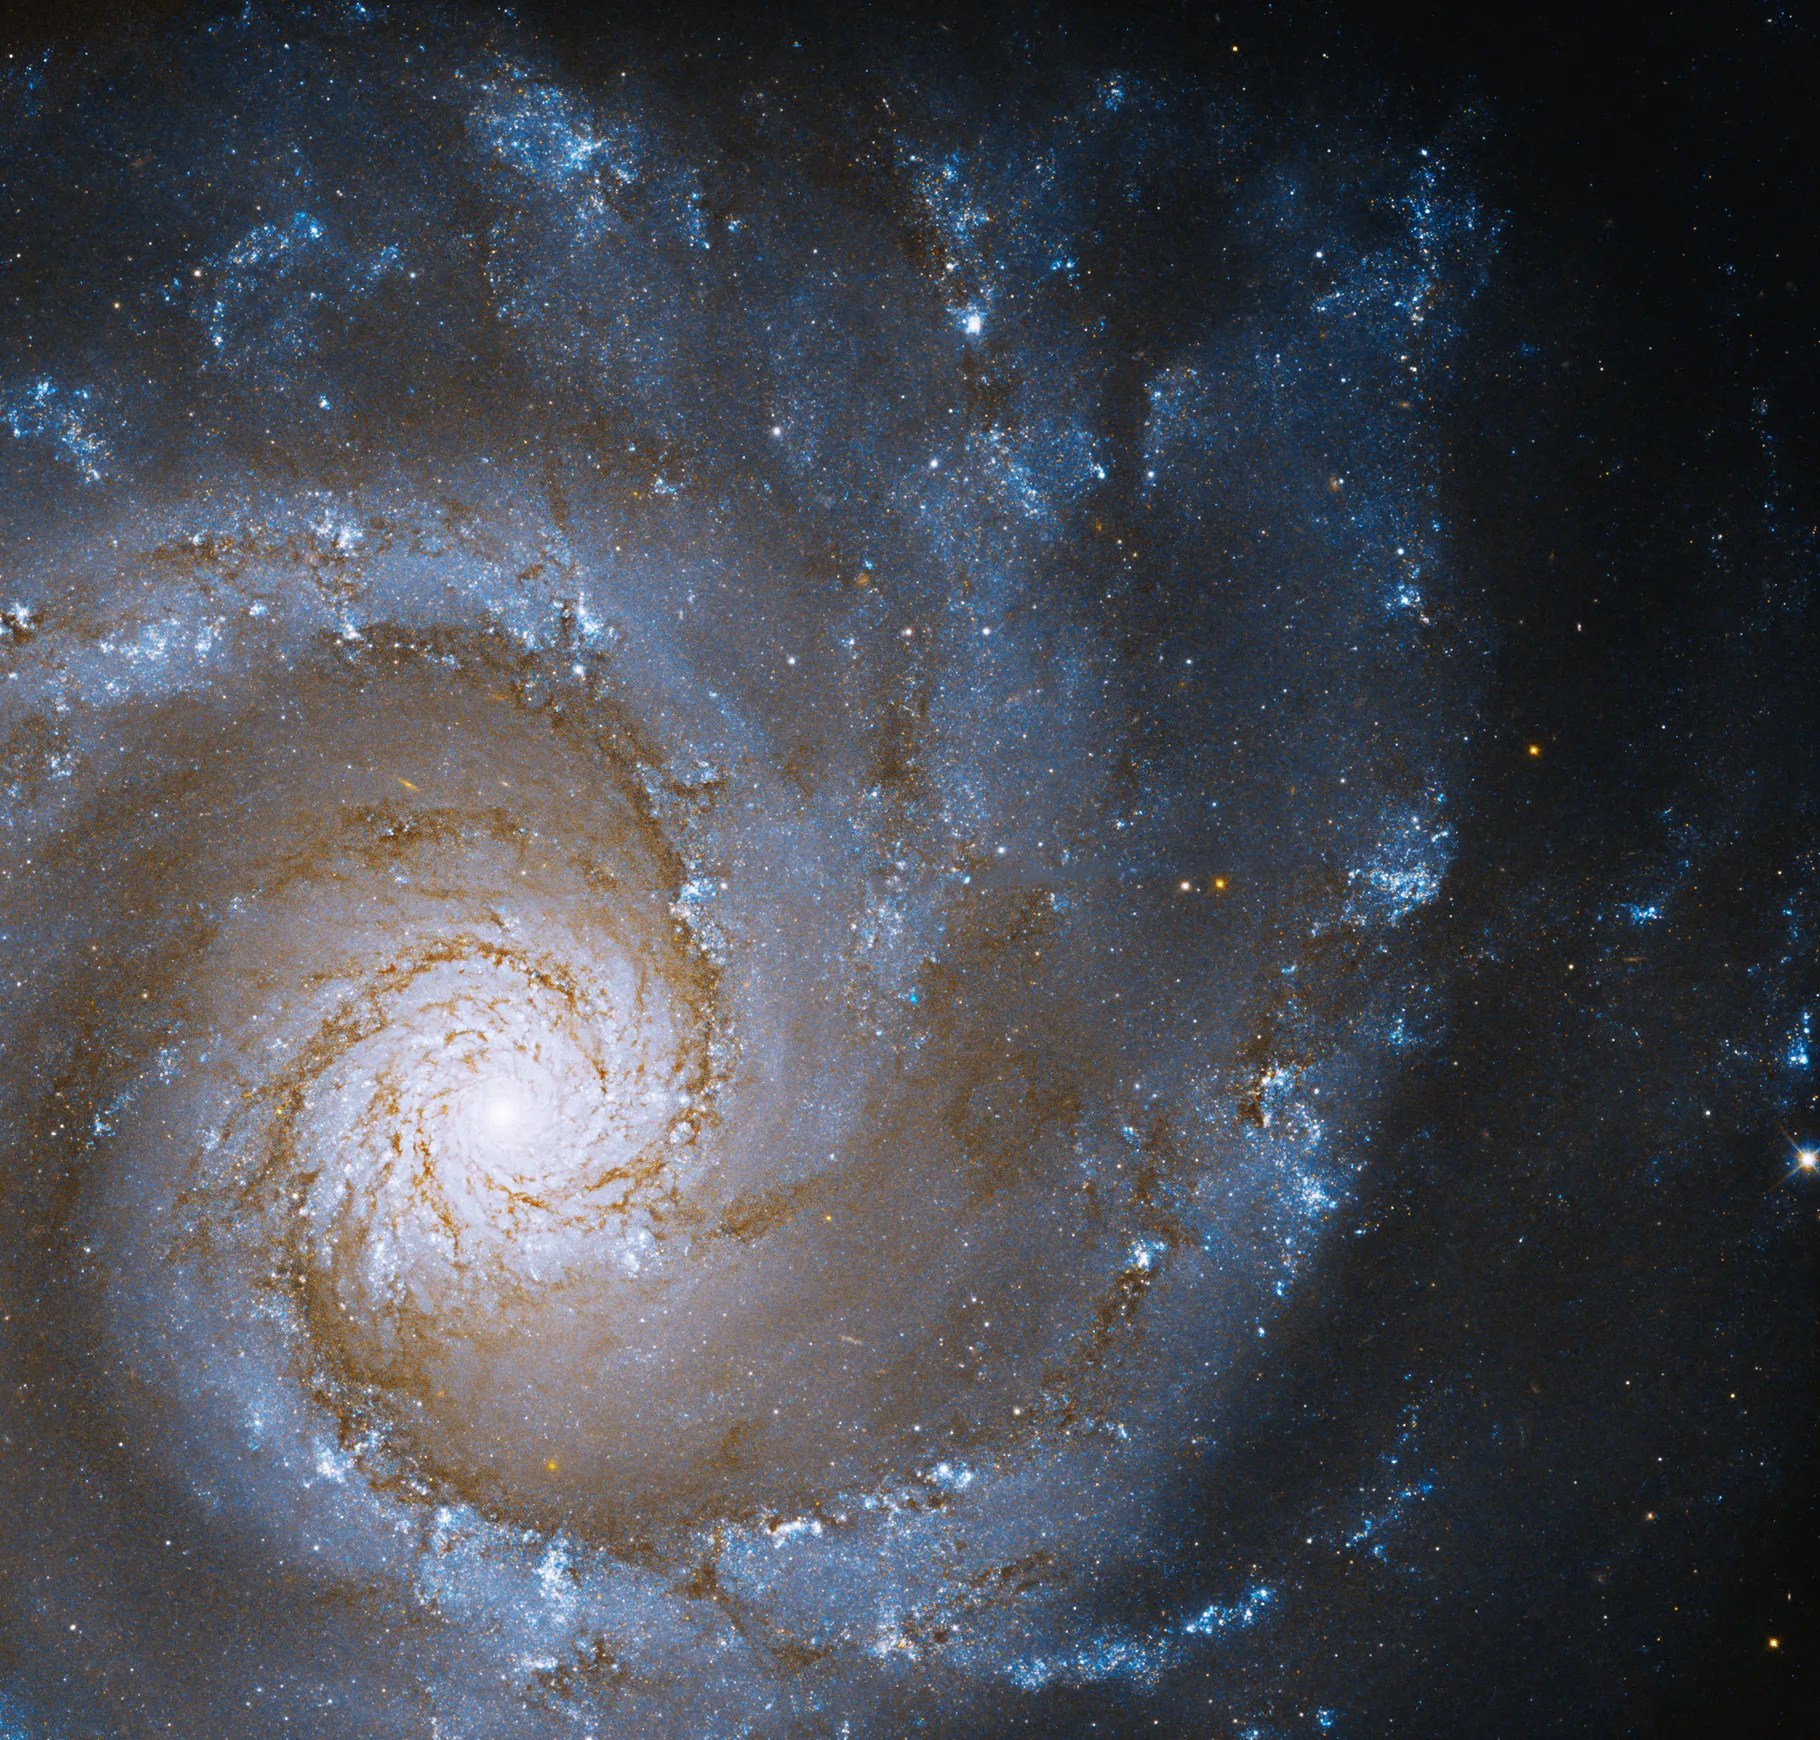 Sublime face-on spiral galaxy whose central bulge of stars is at center left. its spiral arms radiate out filling the image. dark reddish-brown dust lanes line the inner part of the spiral arms.